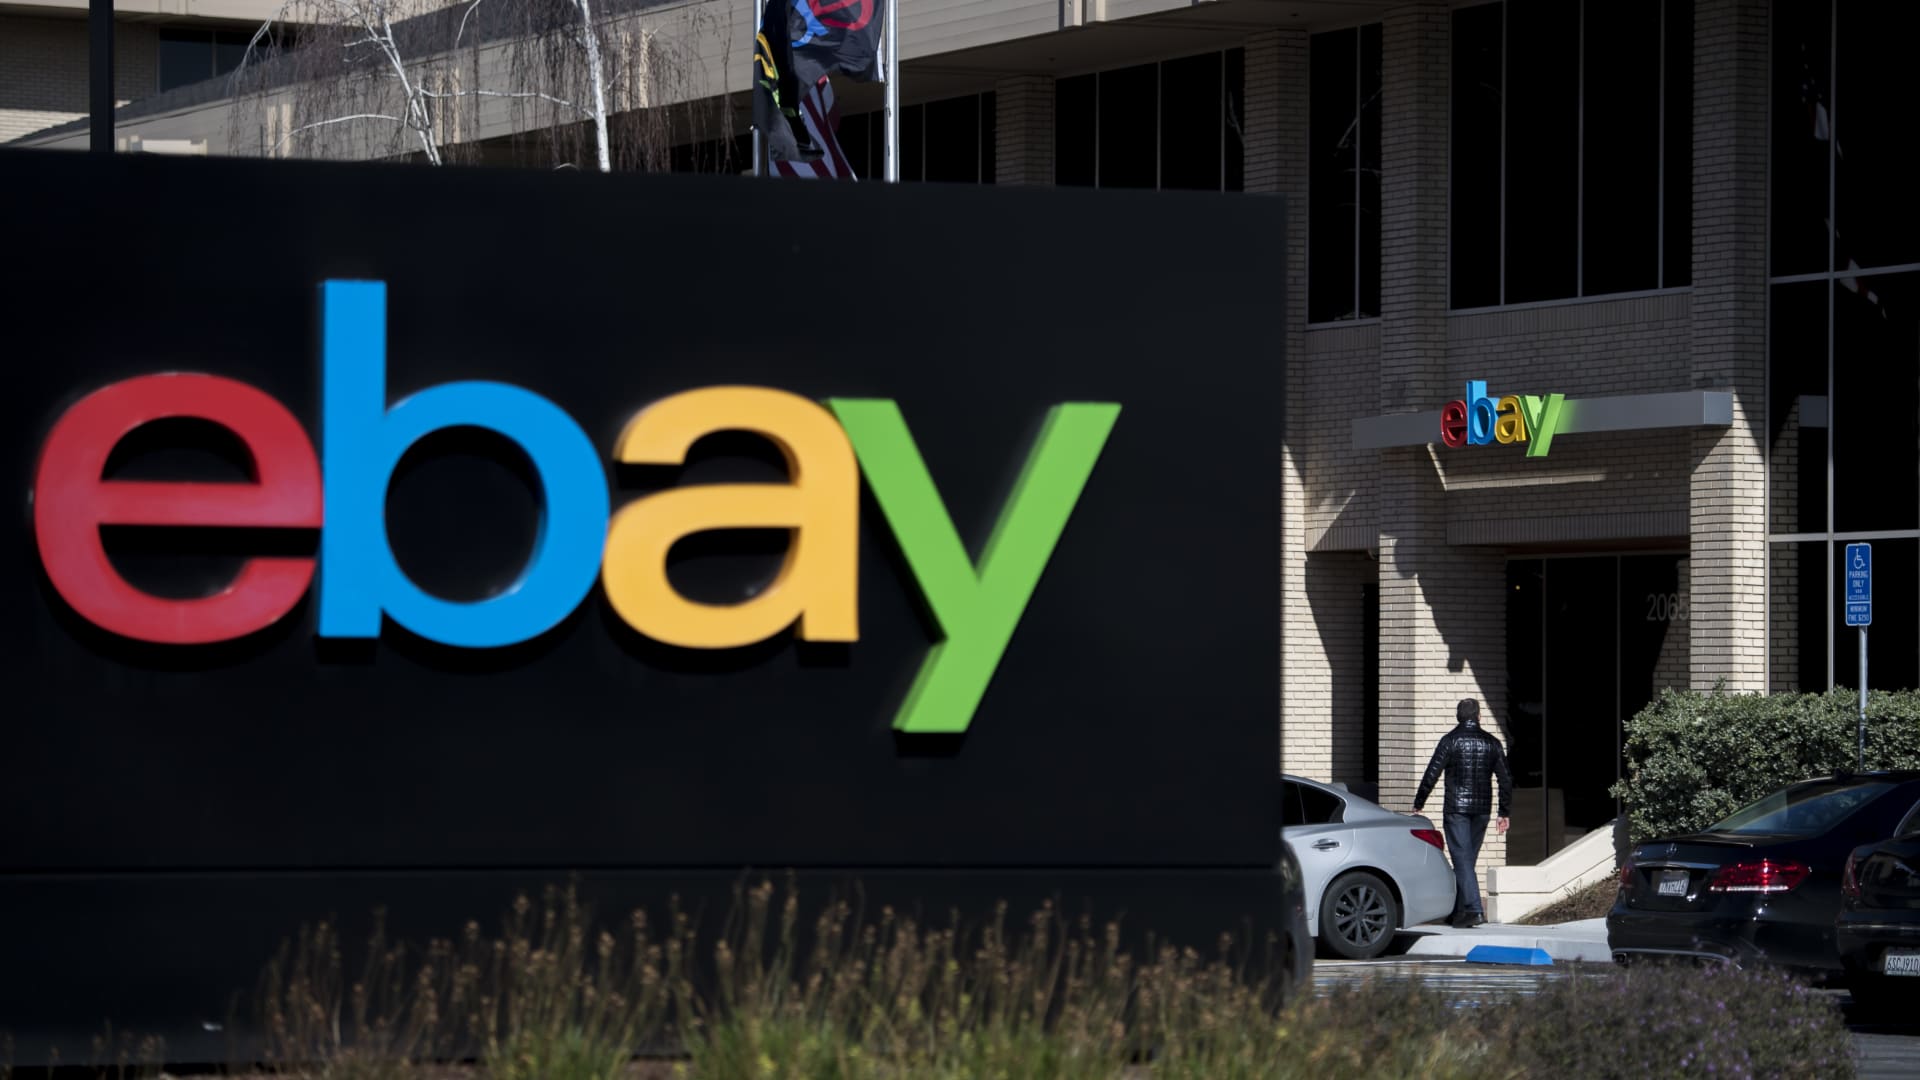 EBay to do away with about 1,000 jobs, or 9% of beefy-time team